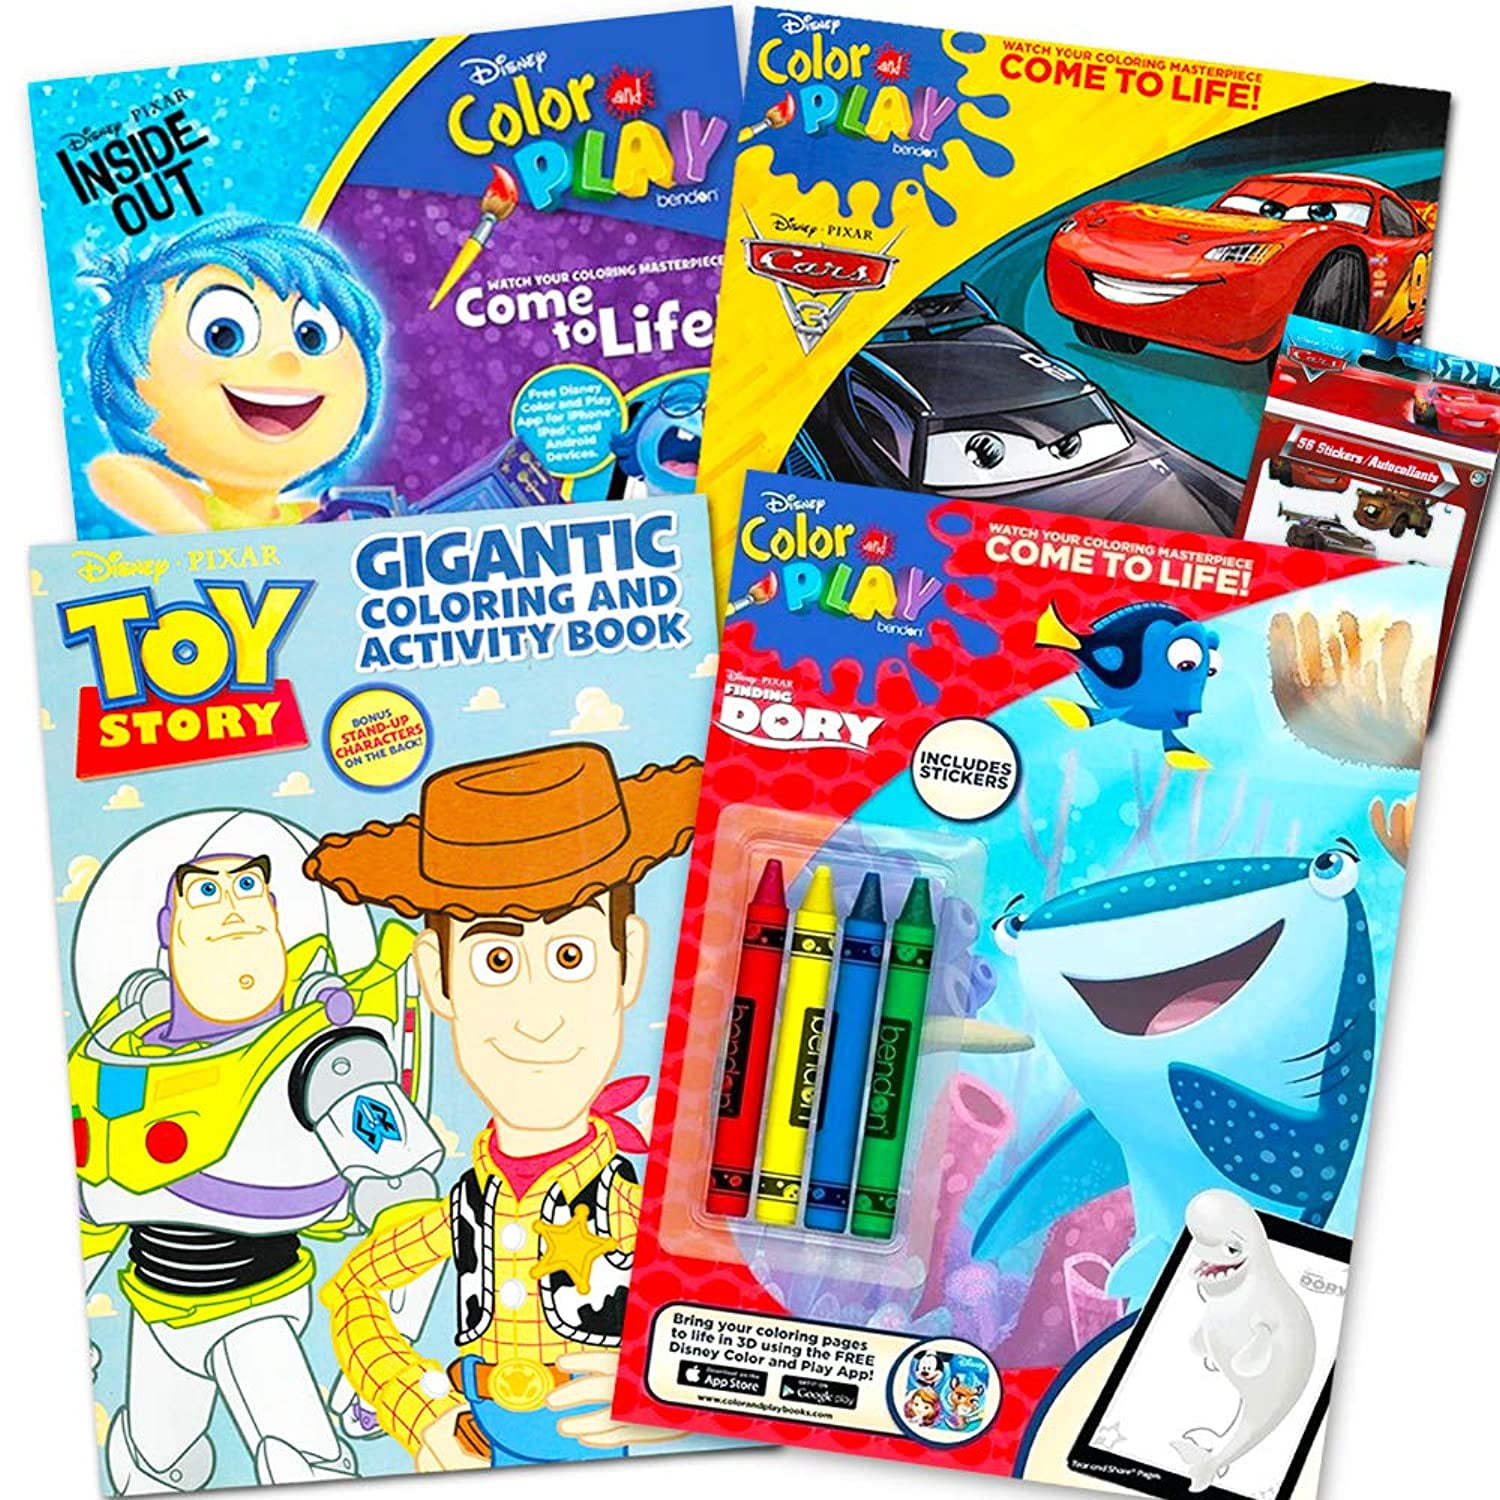 Download Disney Pixar Ultimate Coloring Book Assortment Bundle Includes 4 Books Featuring Disney Cars Toy Story Finding Nemo And More Includes Stickers Walmart Com Walmart Com